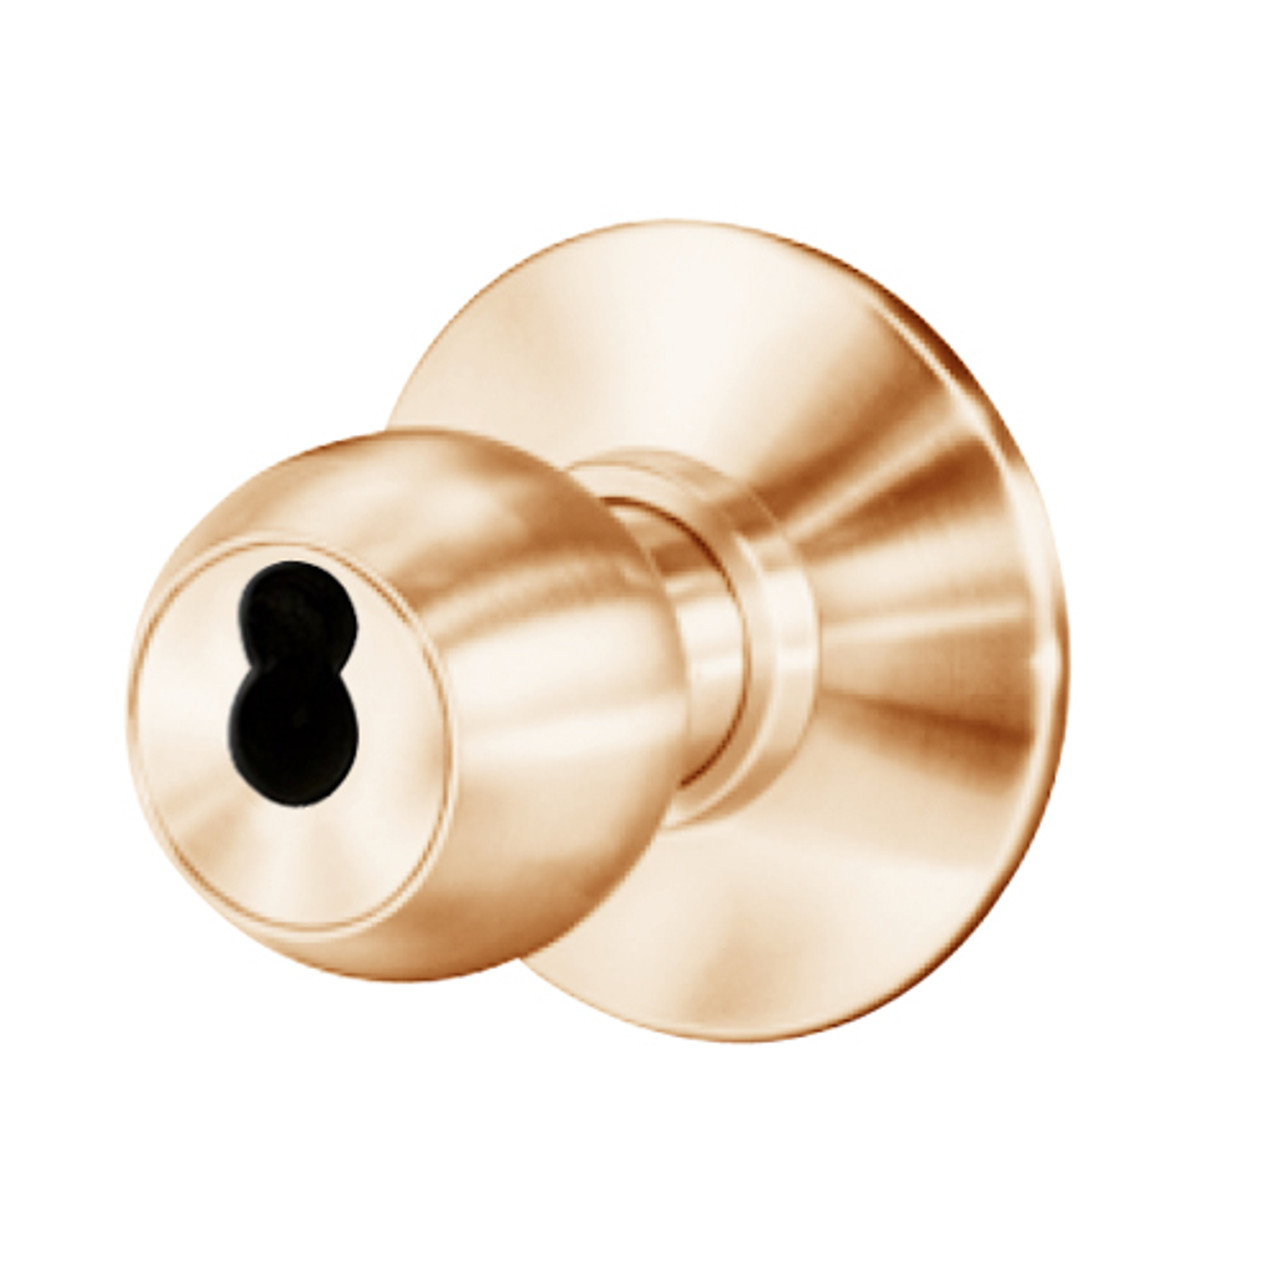 8K37B4DS3611 Best 8K Series Office Heavy Duty Cylindrical Knob Locks with Round Style in Bright Bronze